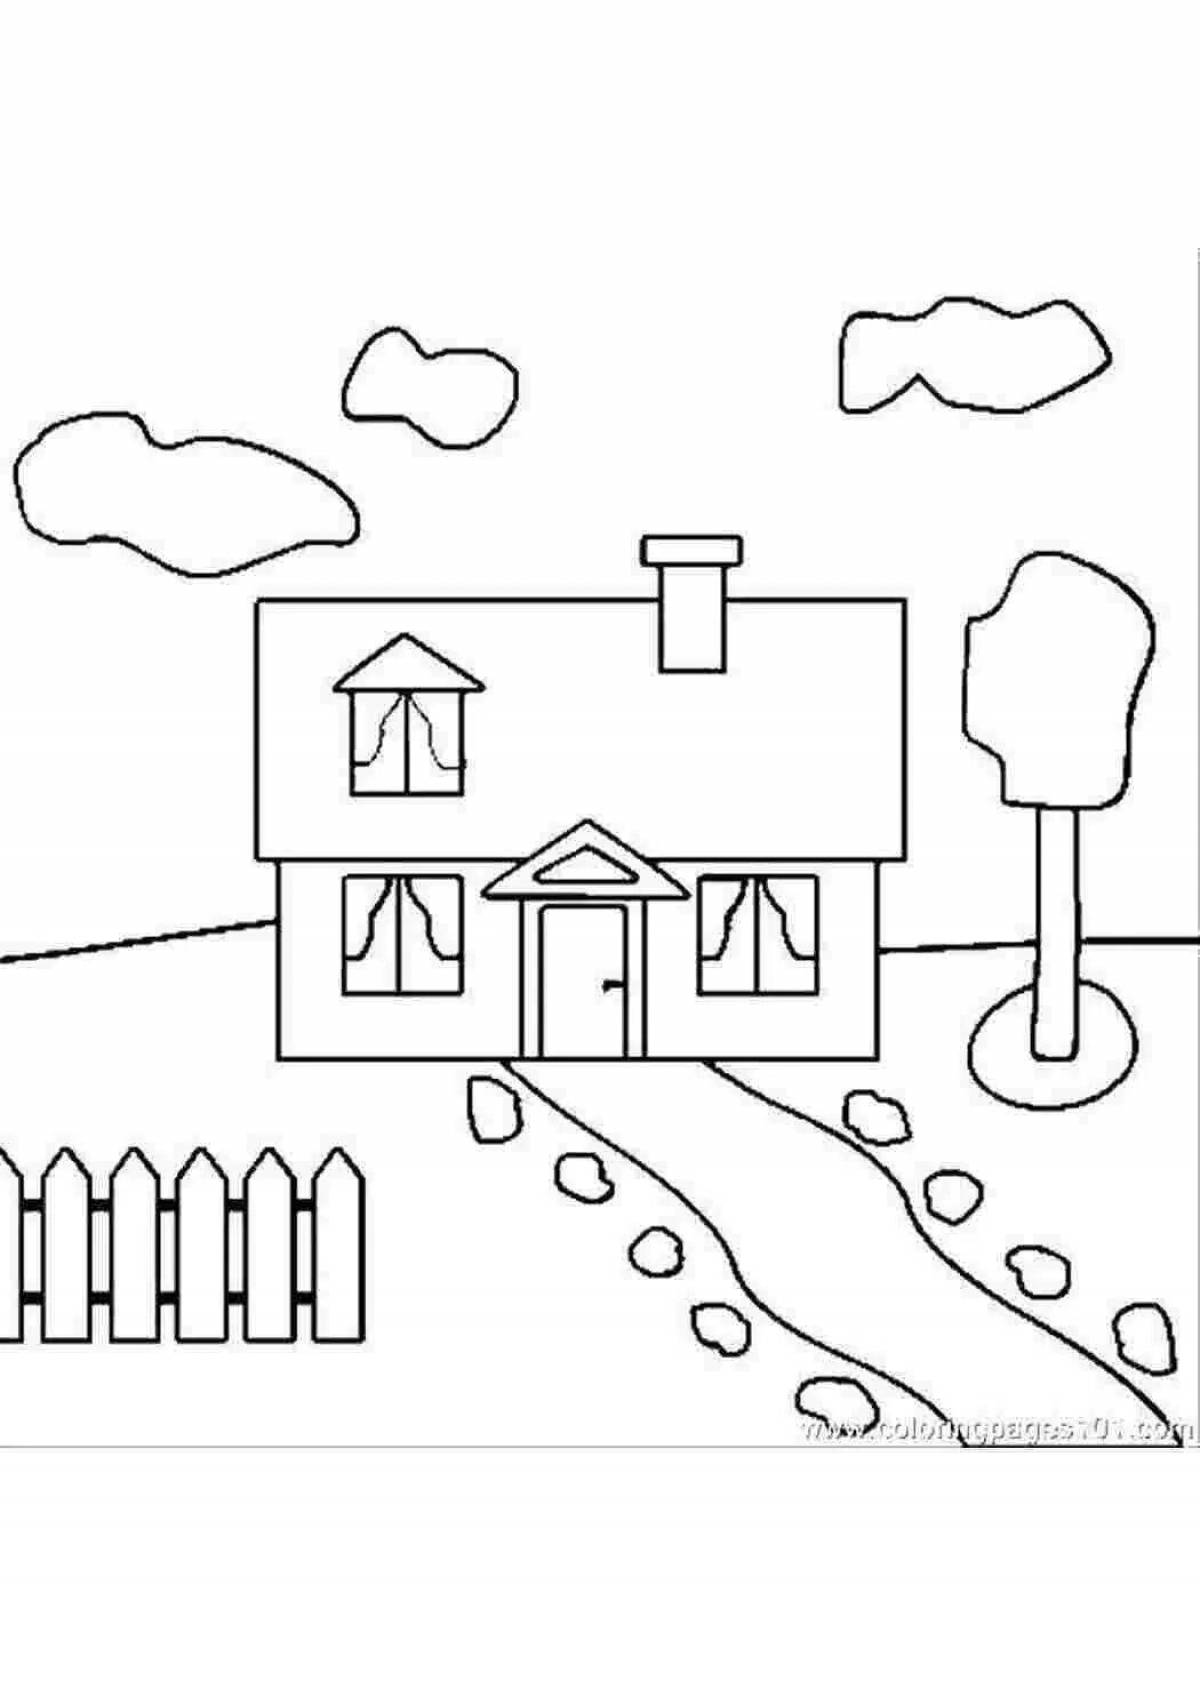 Coloring book shiny house